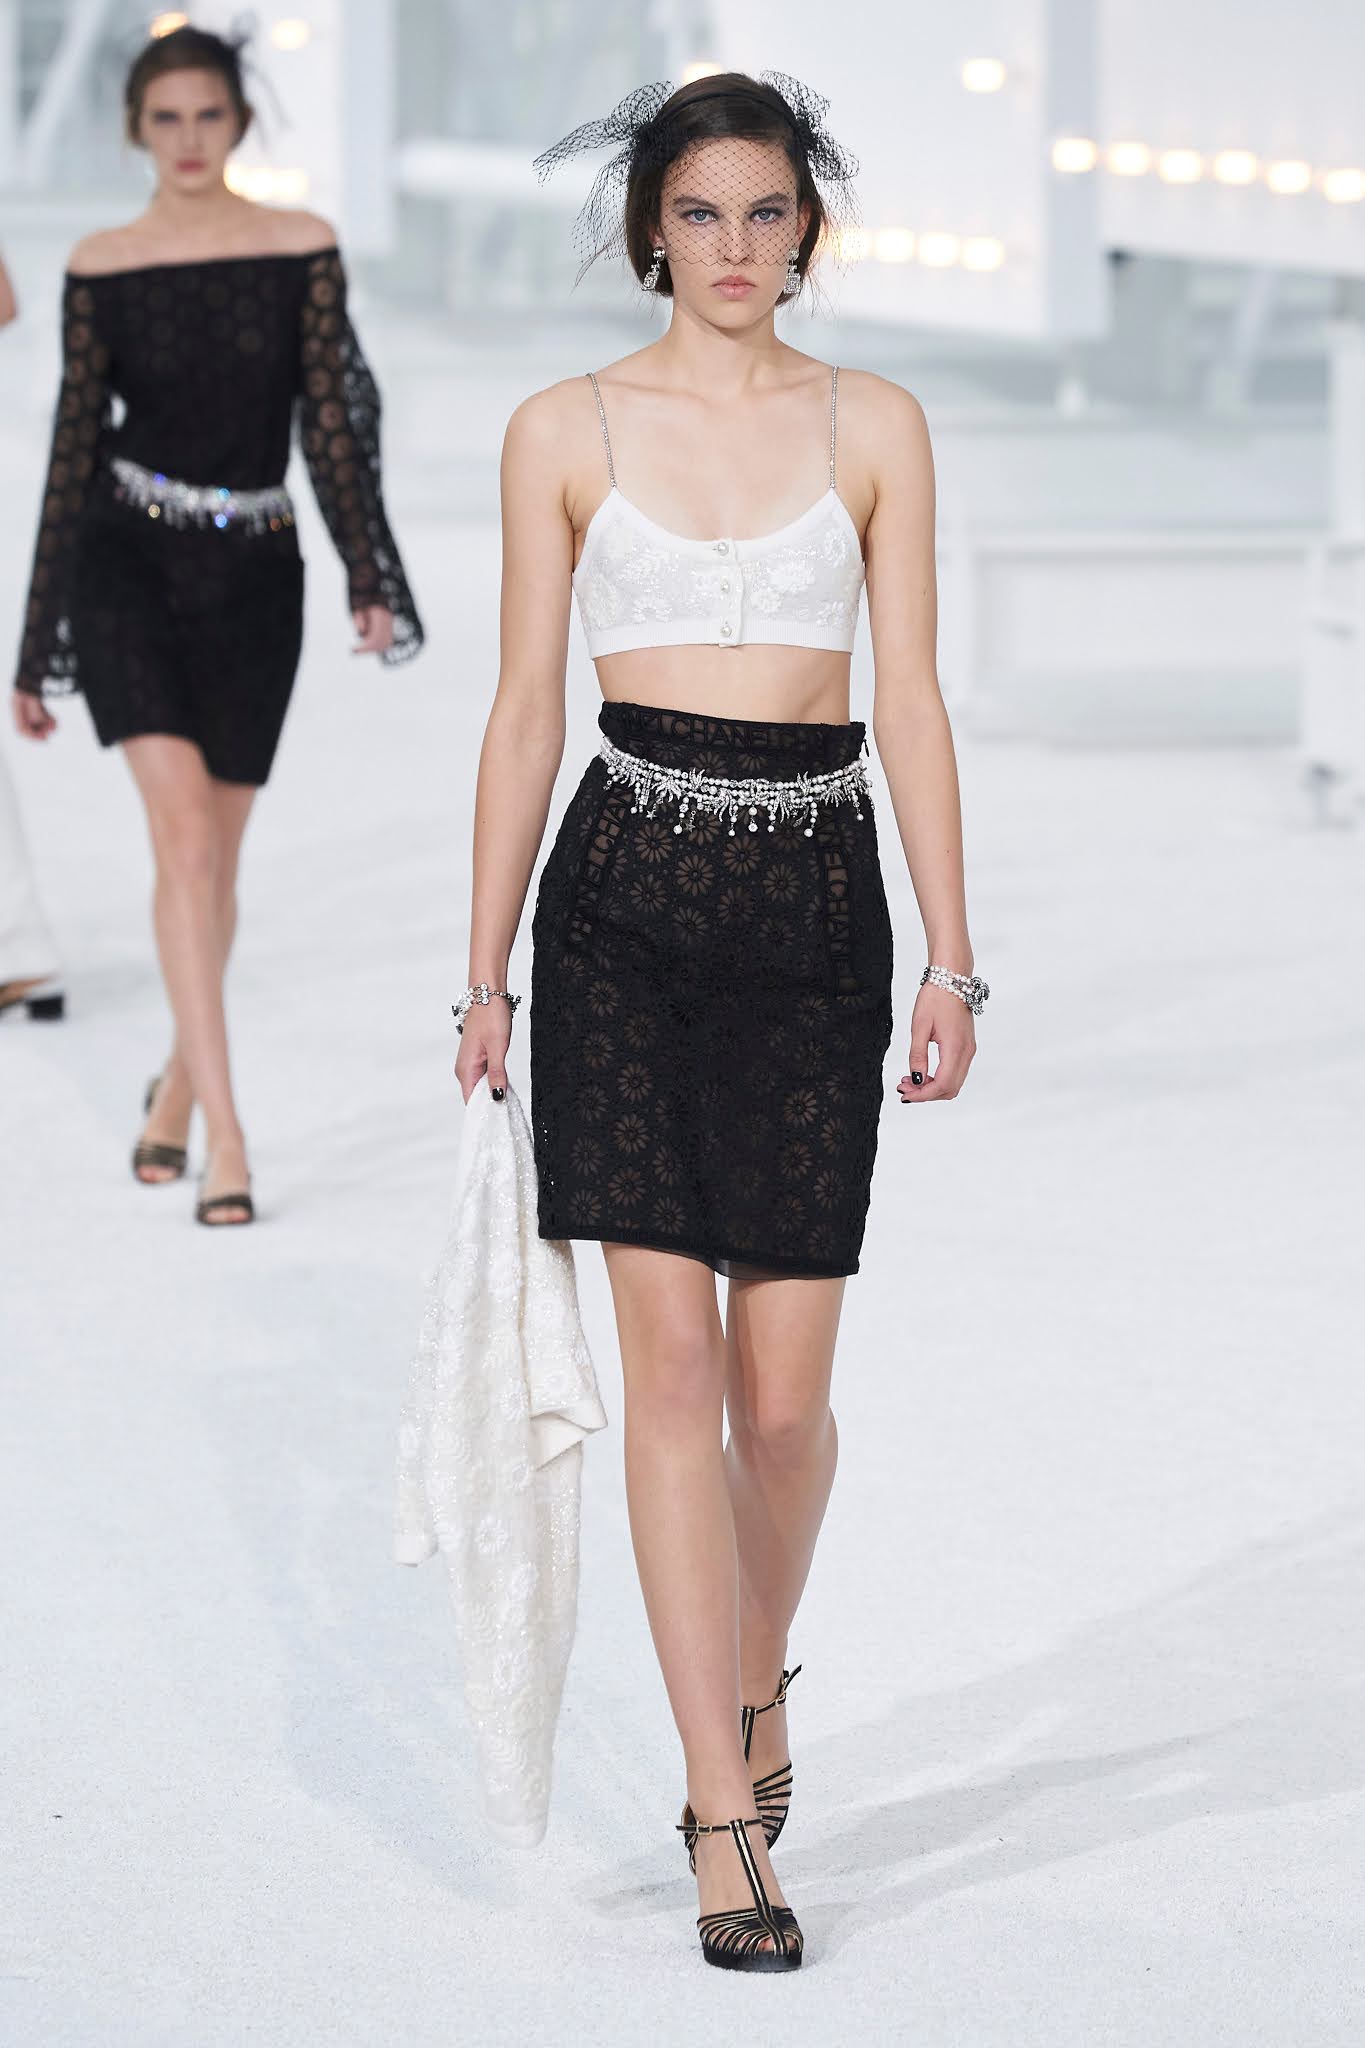 CHANEL: PURE GLAM